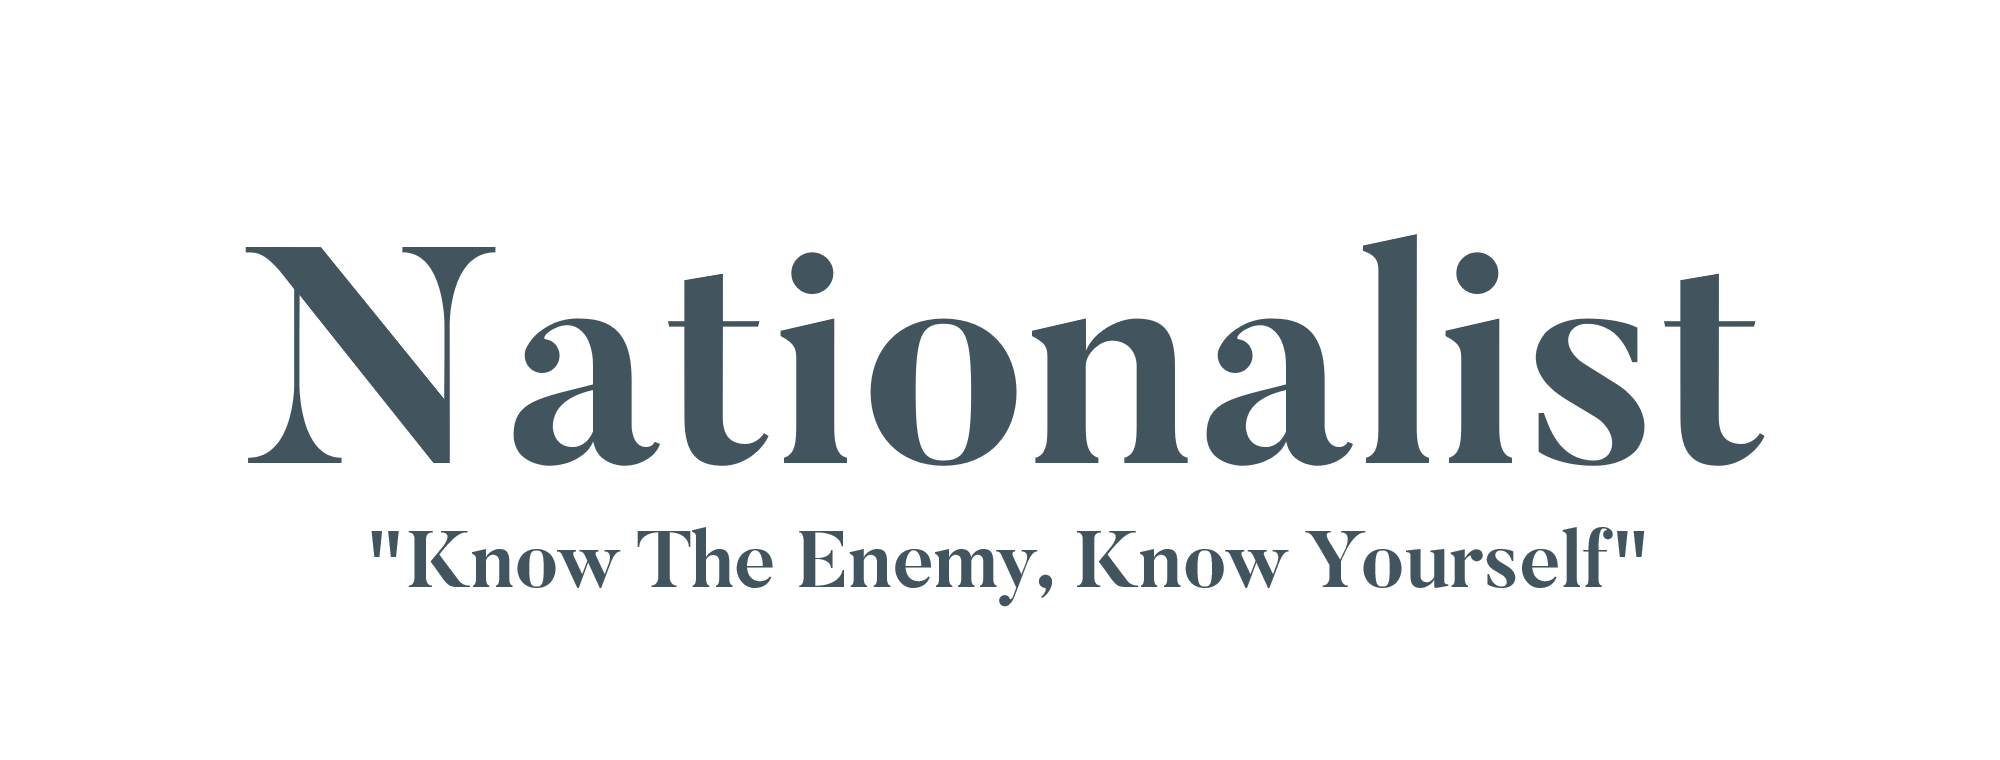 Link to Nationalist.co.uk Text reads Know The Enemy Know Yourself